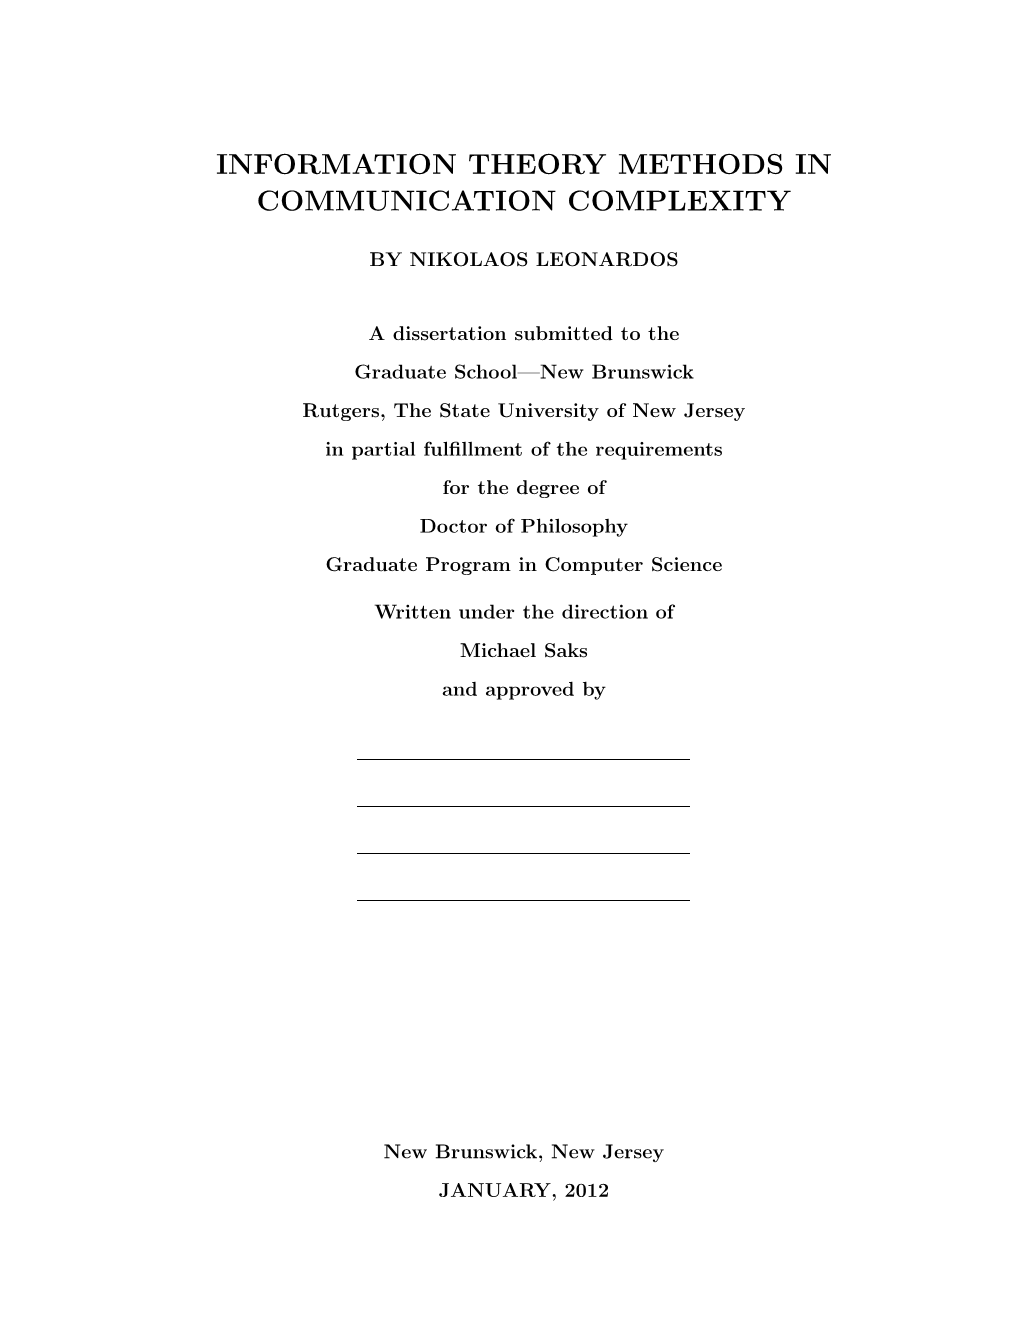 Information Theory Methods in Communication Complexity